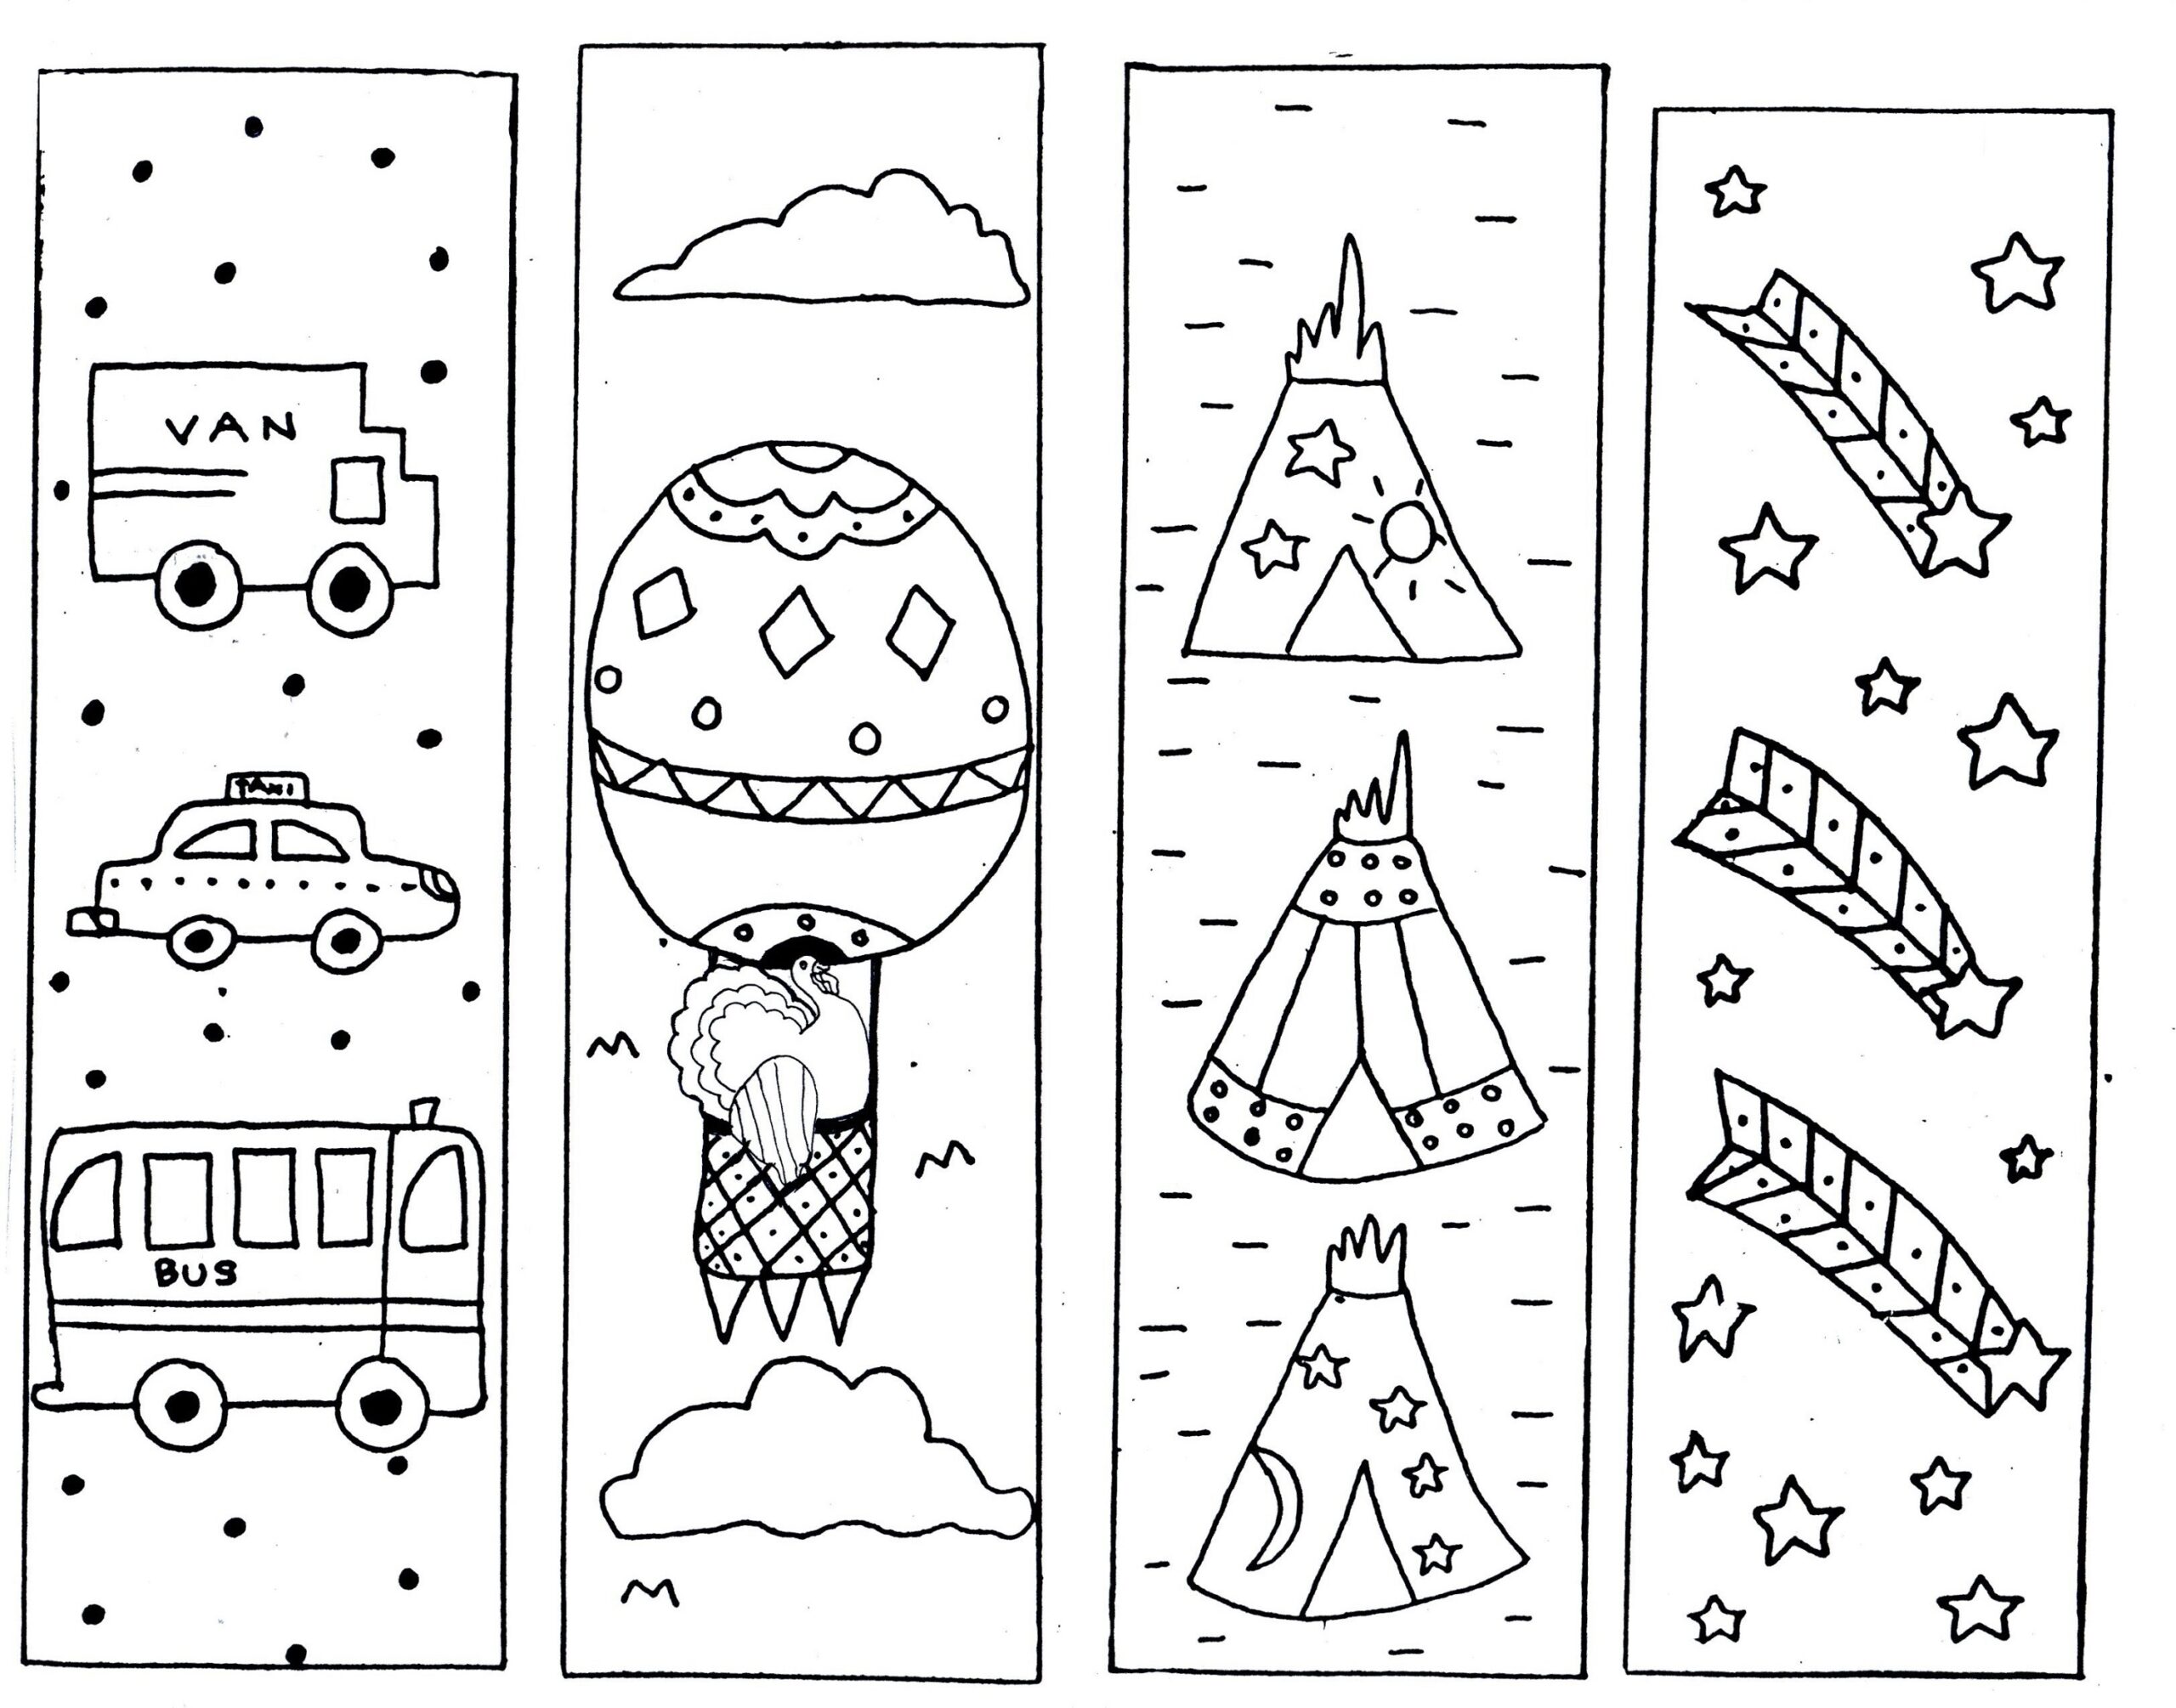 Printable Coloring Bookmarks For Kids_33074